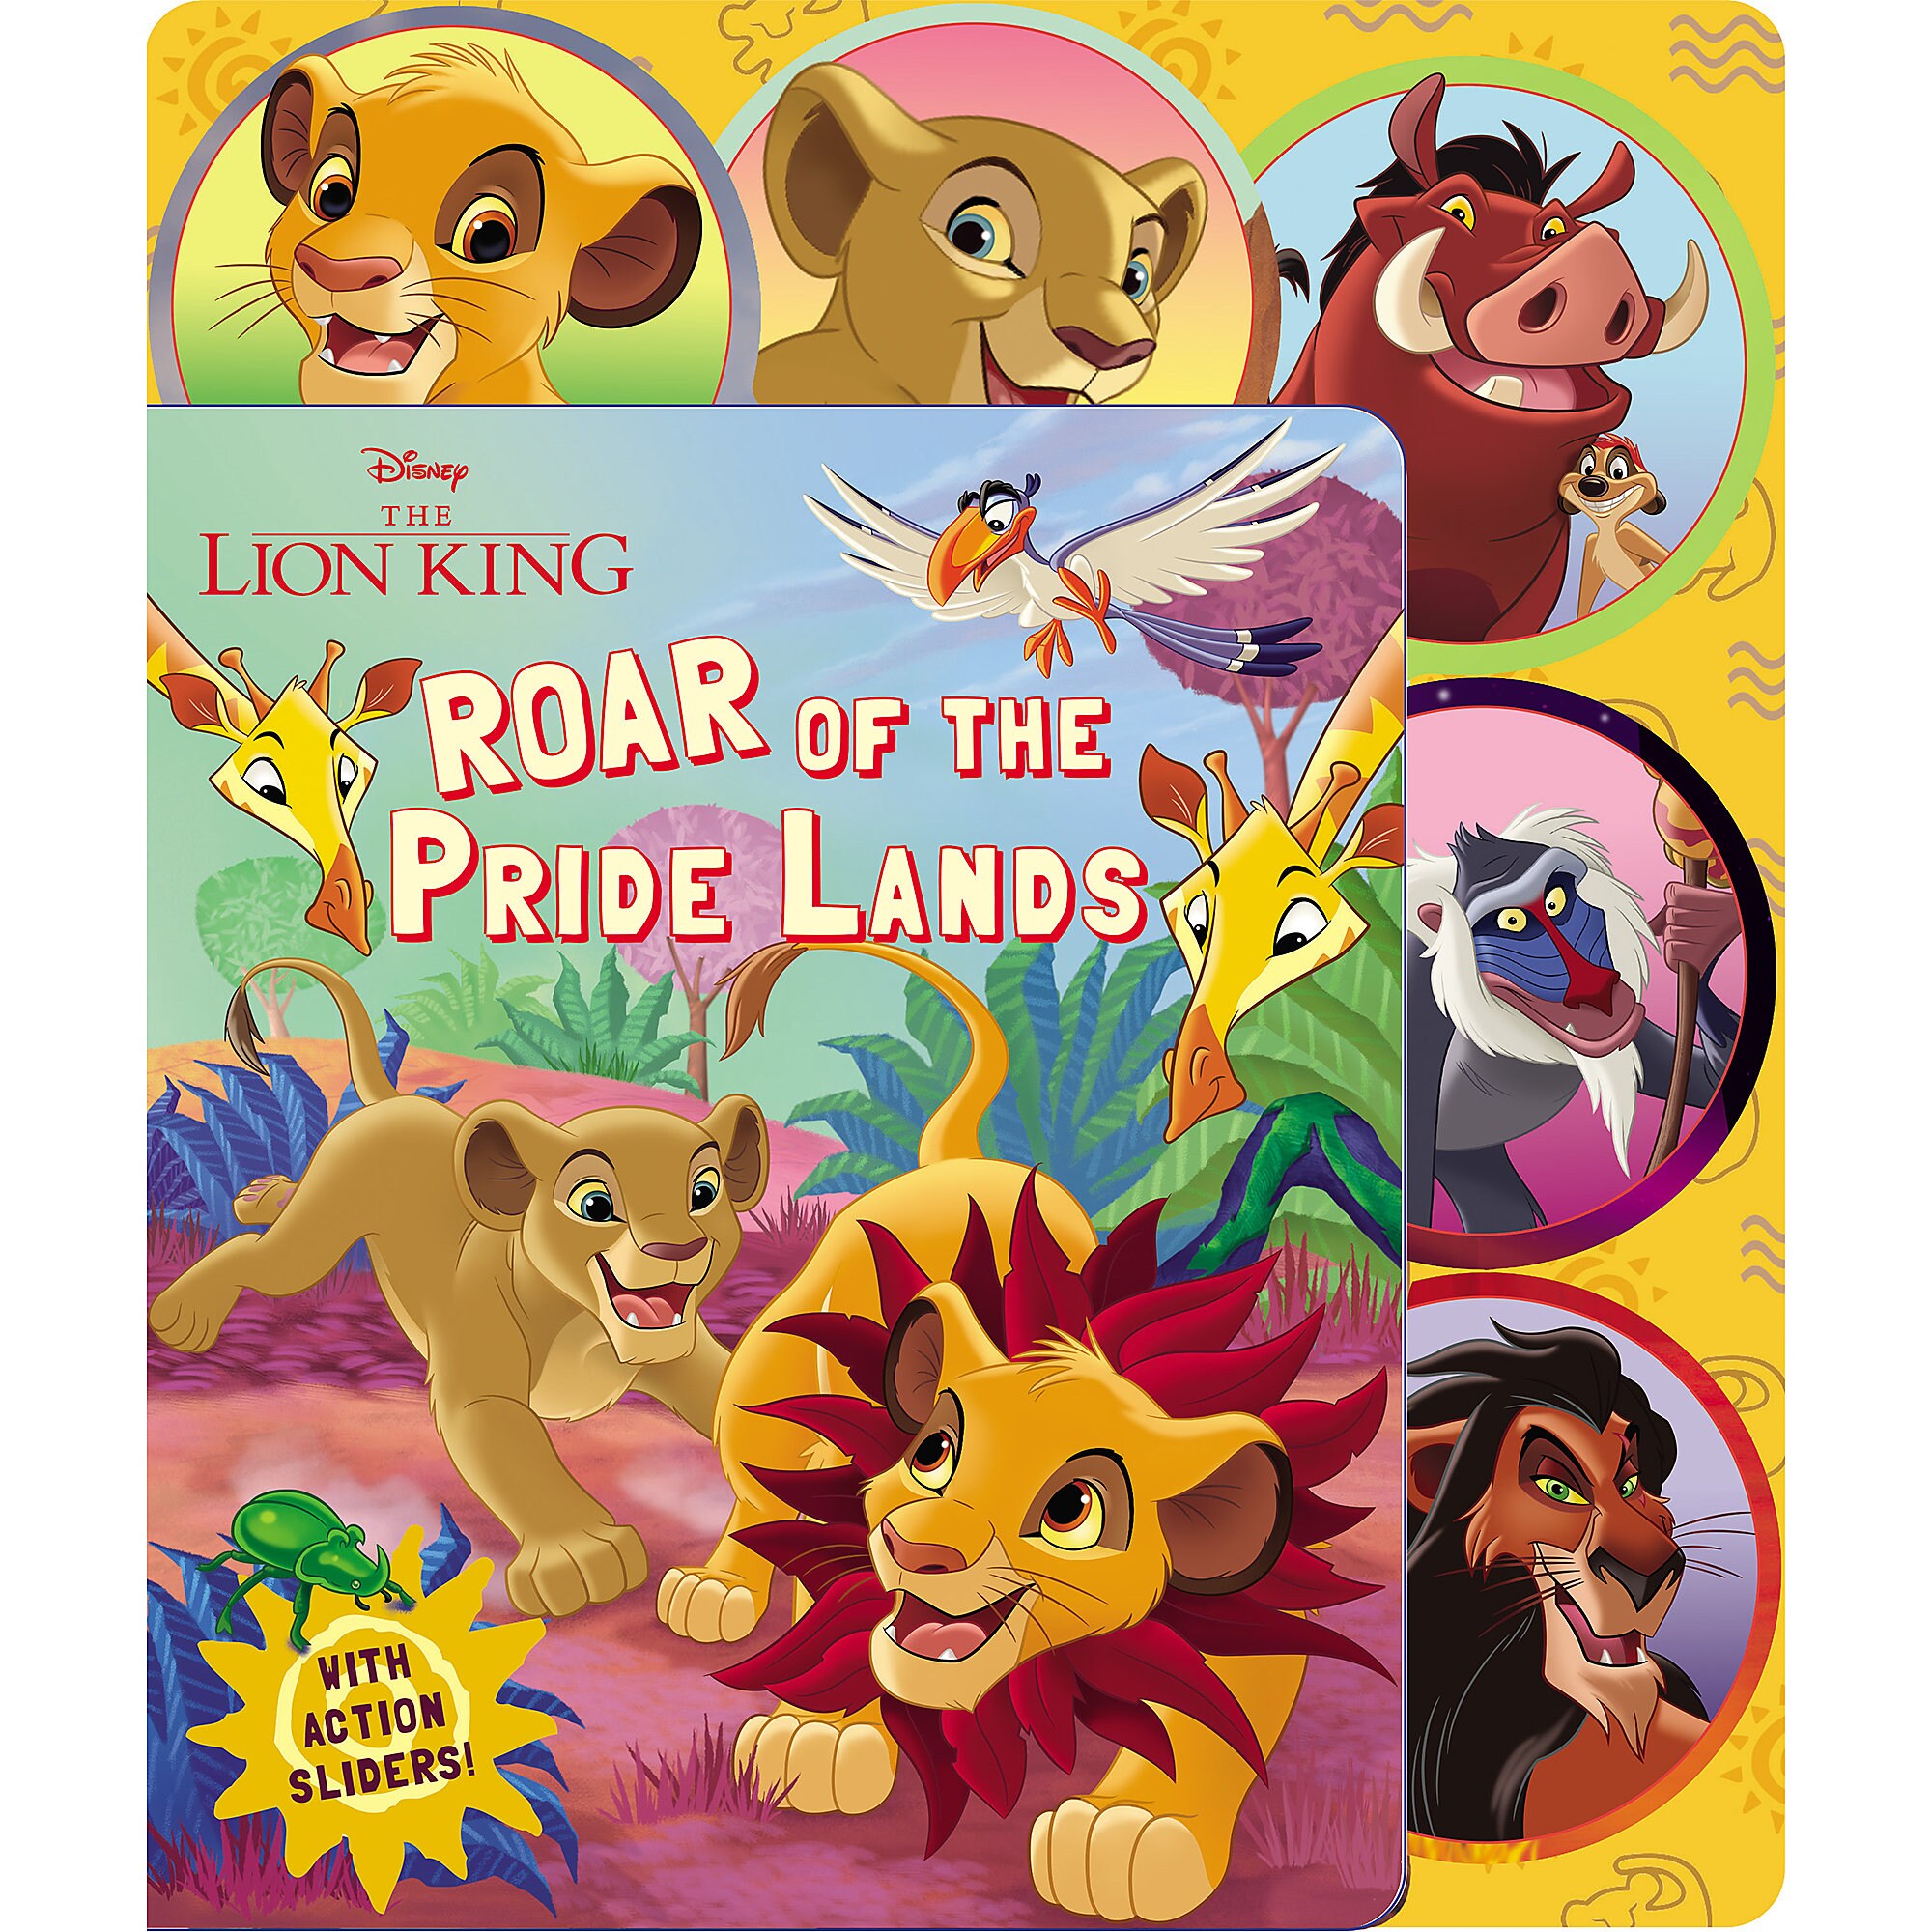 The Lion King: Roar of the Pride Lands Book